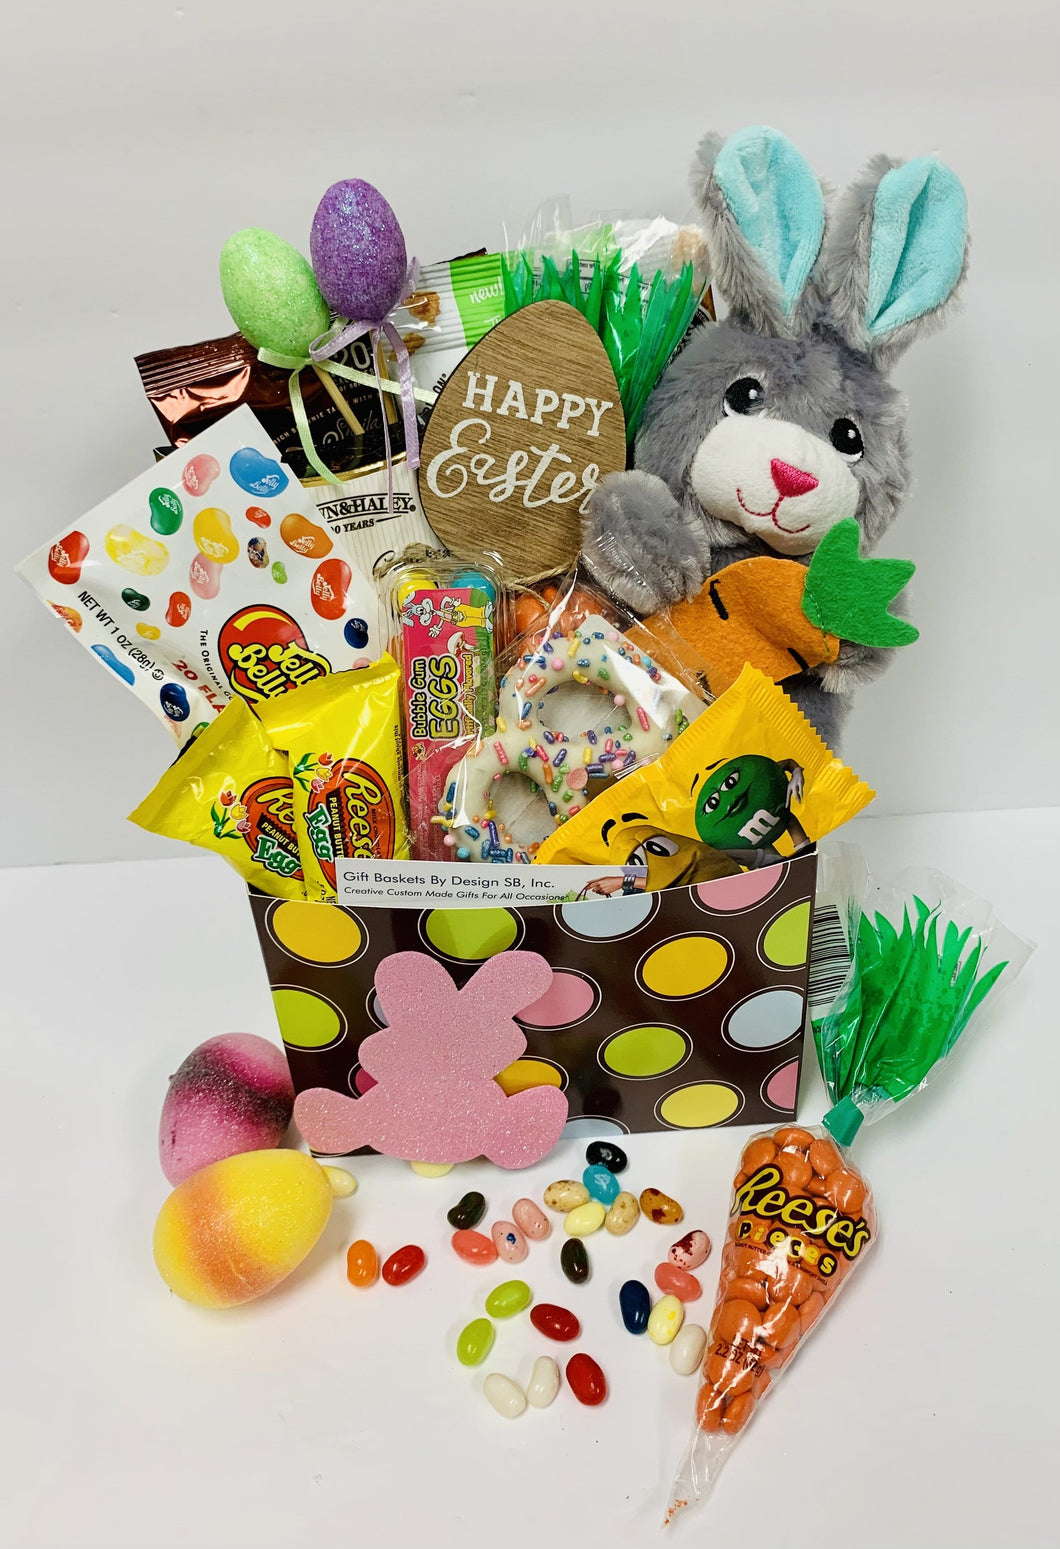 My Bunny Hop *New - Gift Baskets By Design SB, Inc.